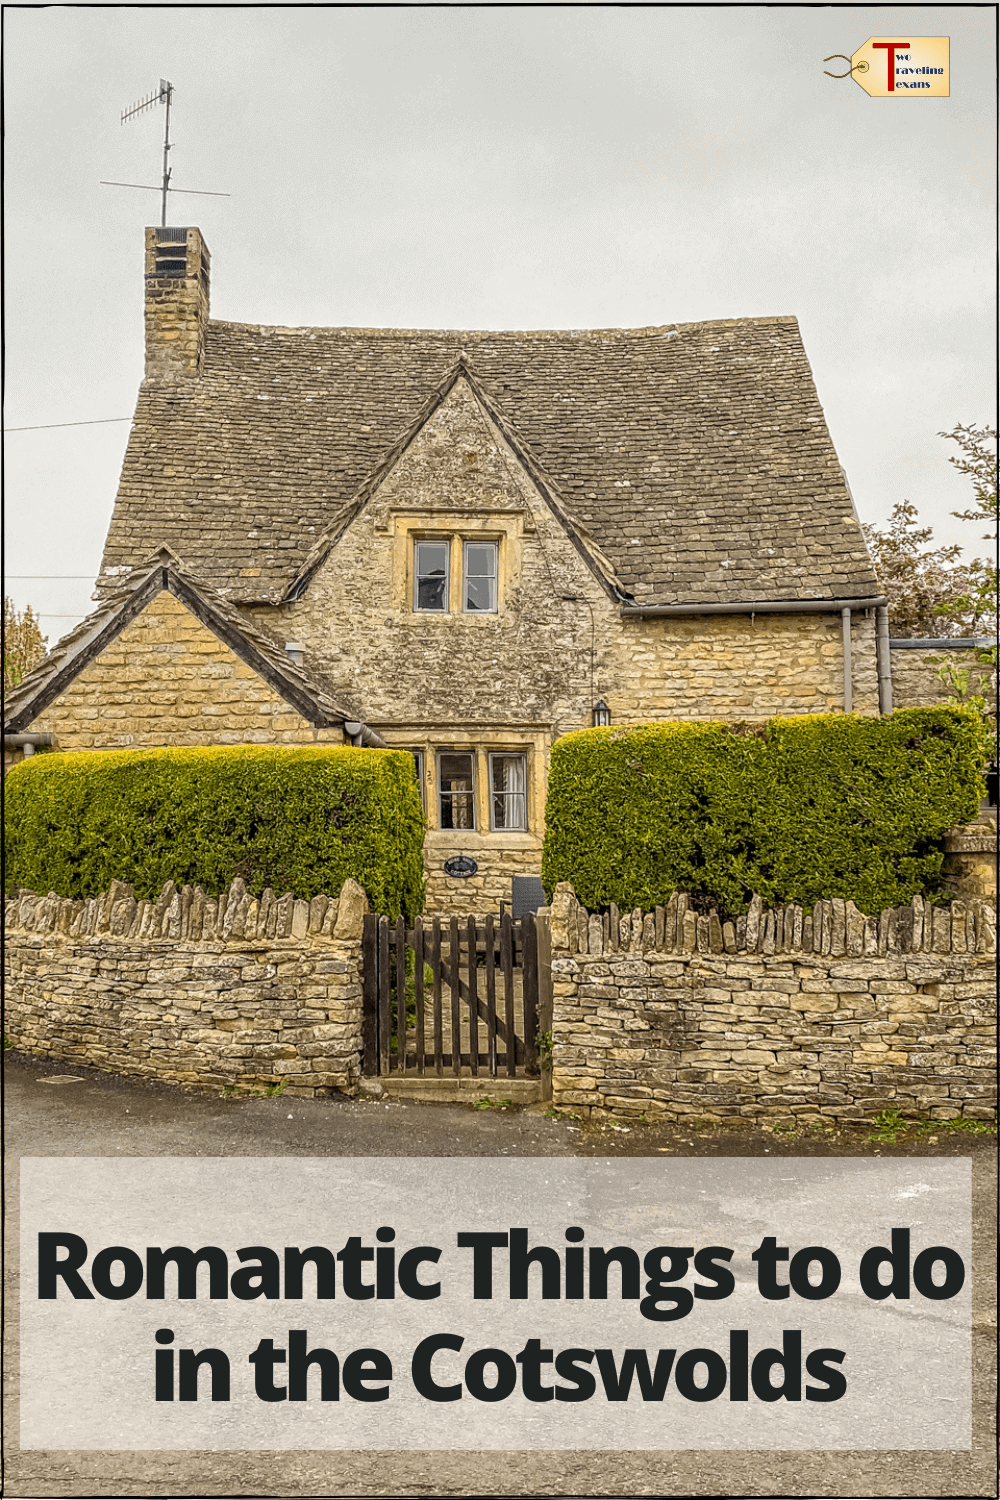 charming cottage in the cotswolds with text overlay "romantic things to do in the cotswolds"